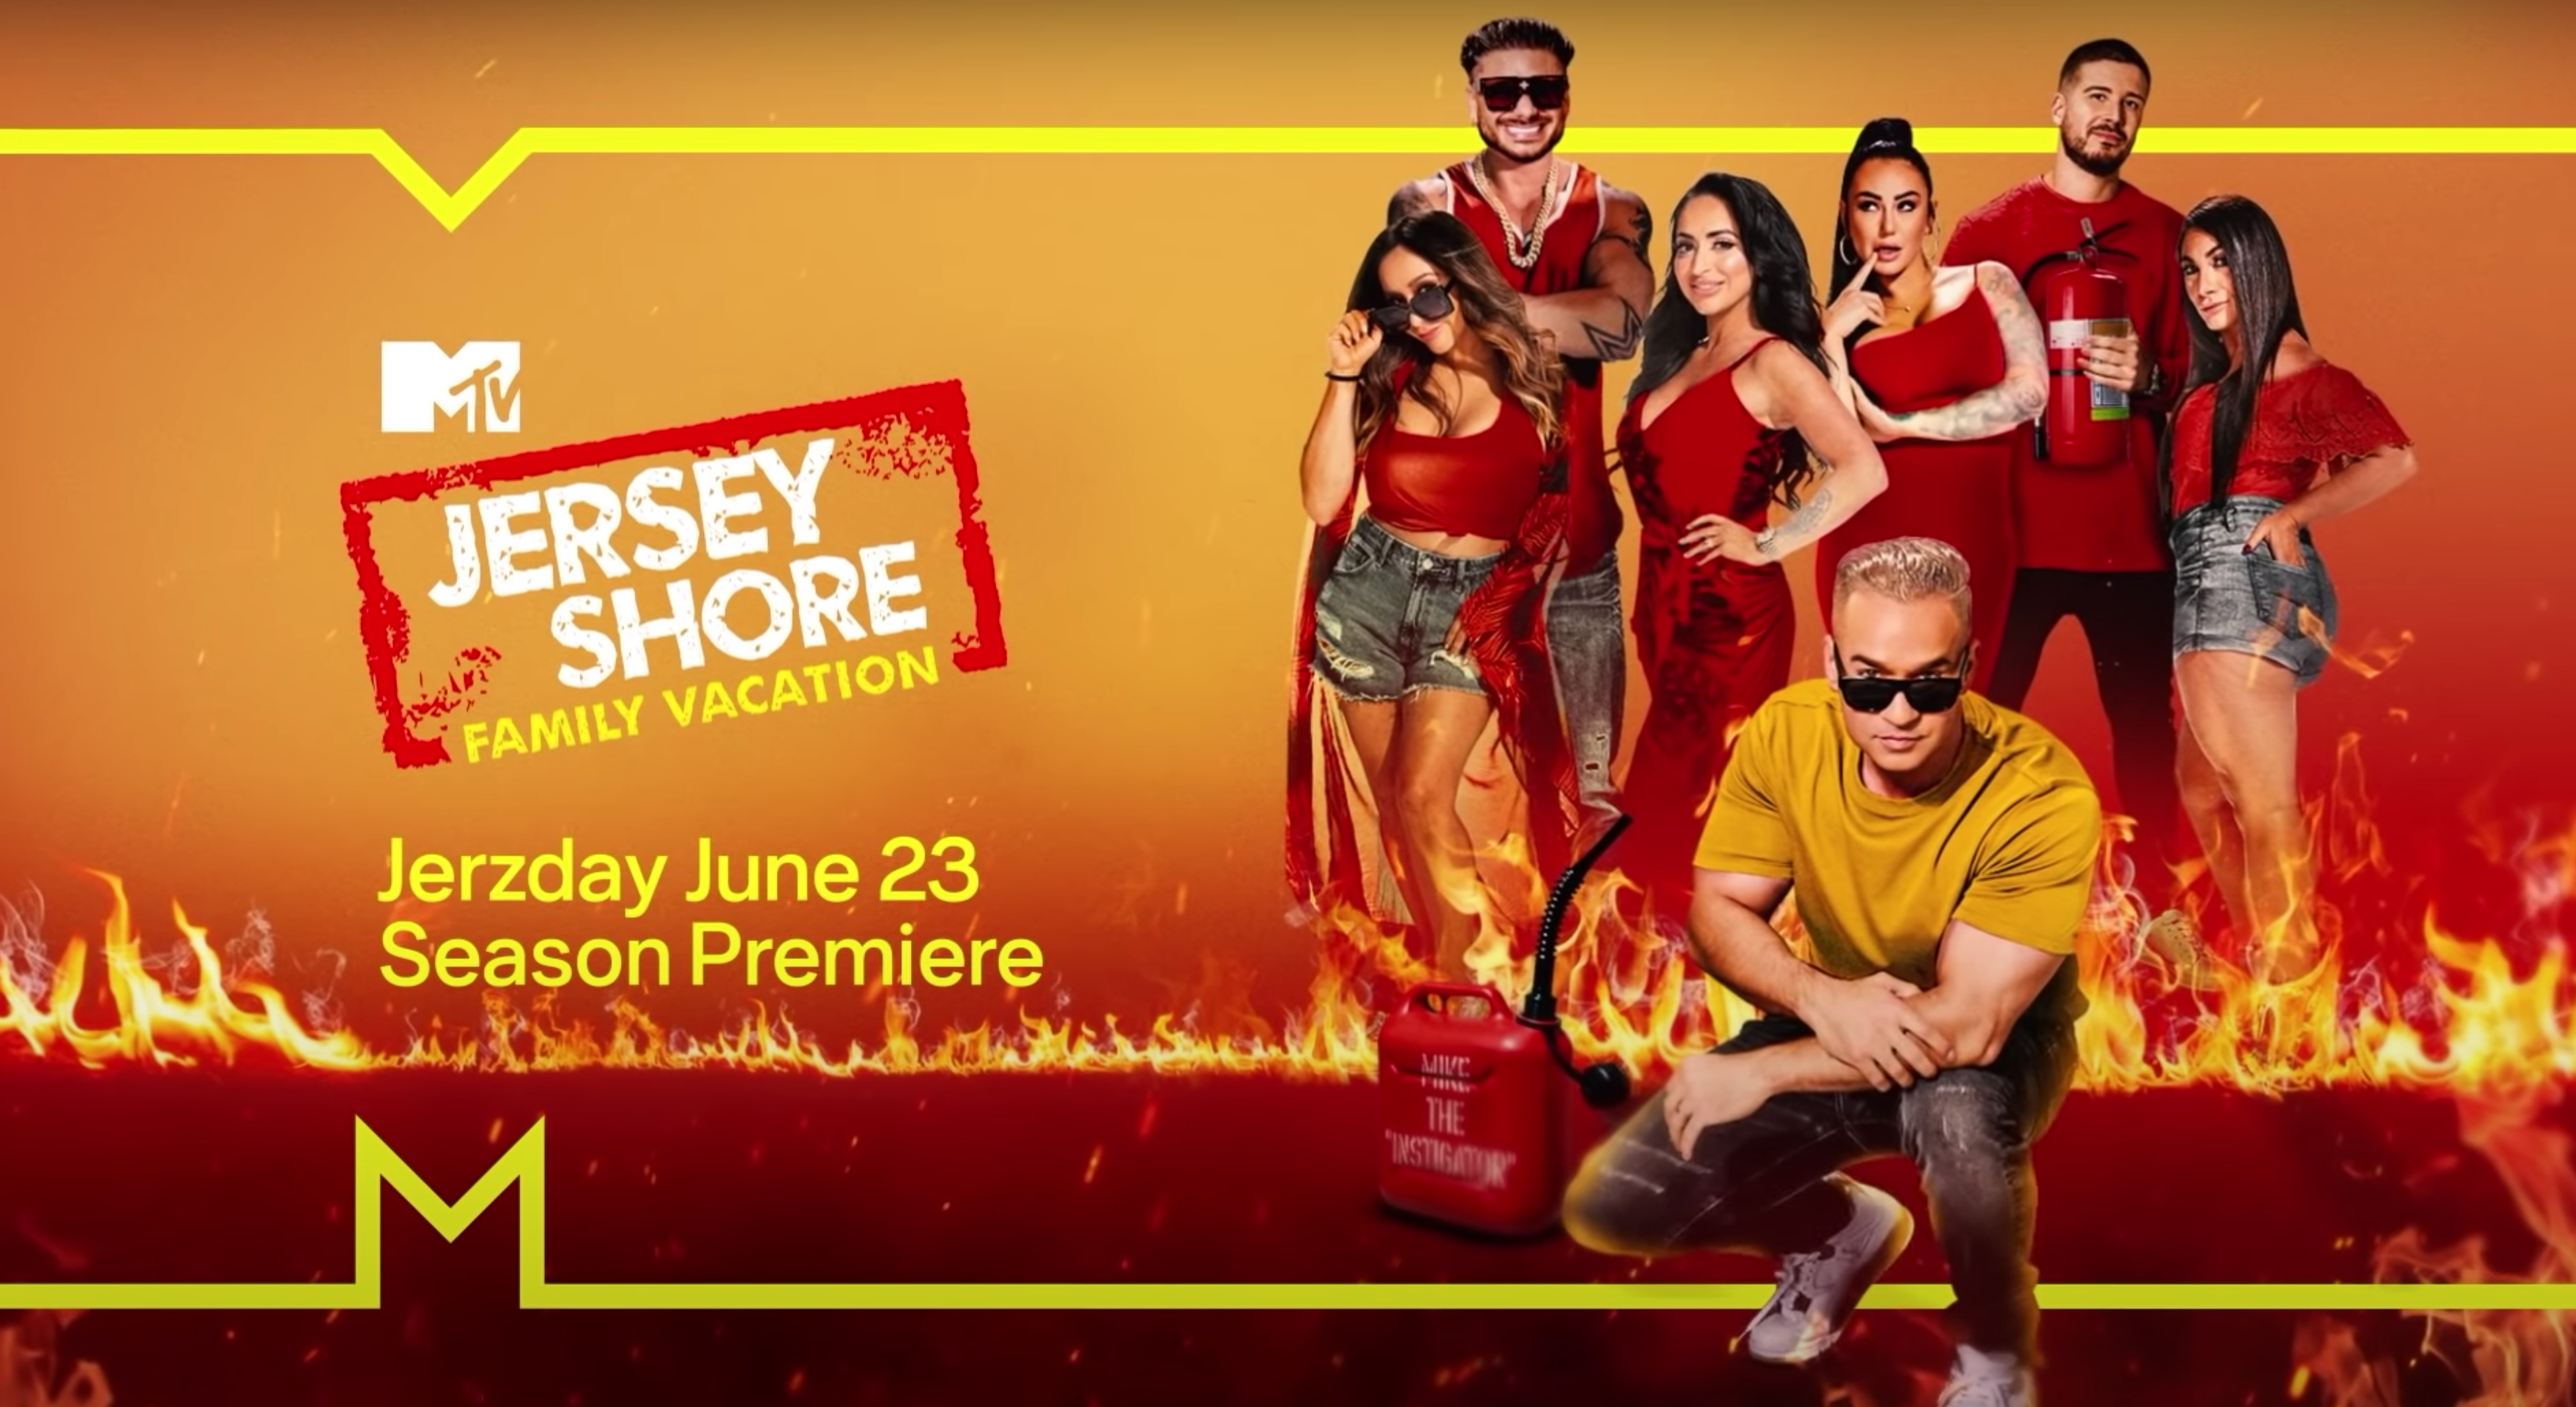 Toevlucht Land van staatsburgerschap Wereldrecord Guinness Book Jersey Shore: Family Vacation' 2022 free live stream: How to watch online  without cable (7/7/22) - nj.com